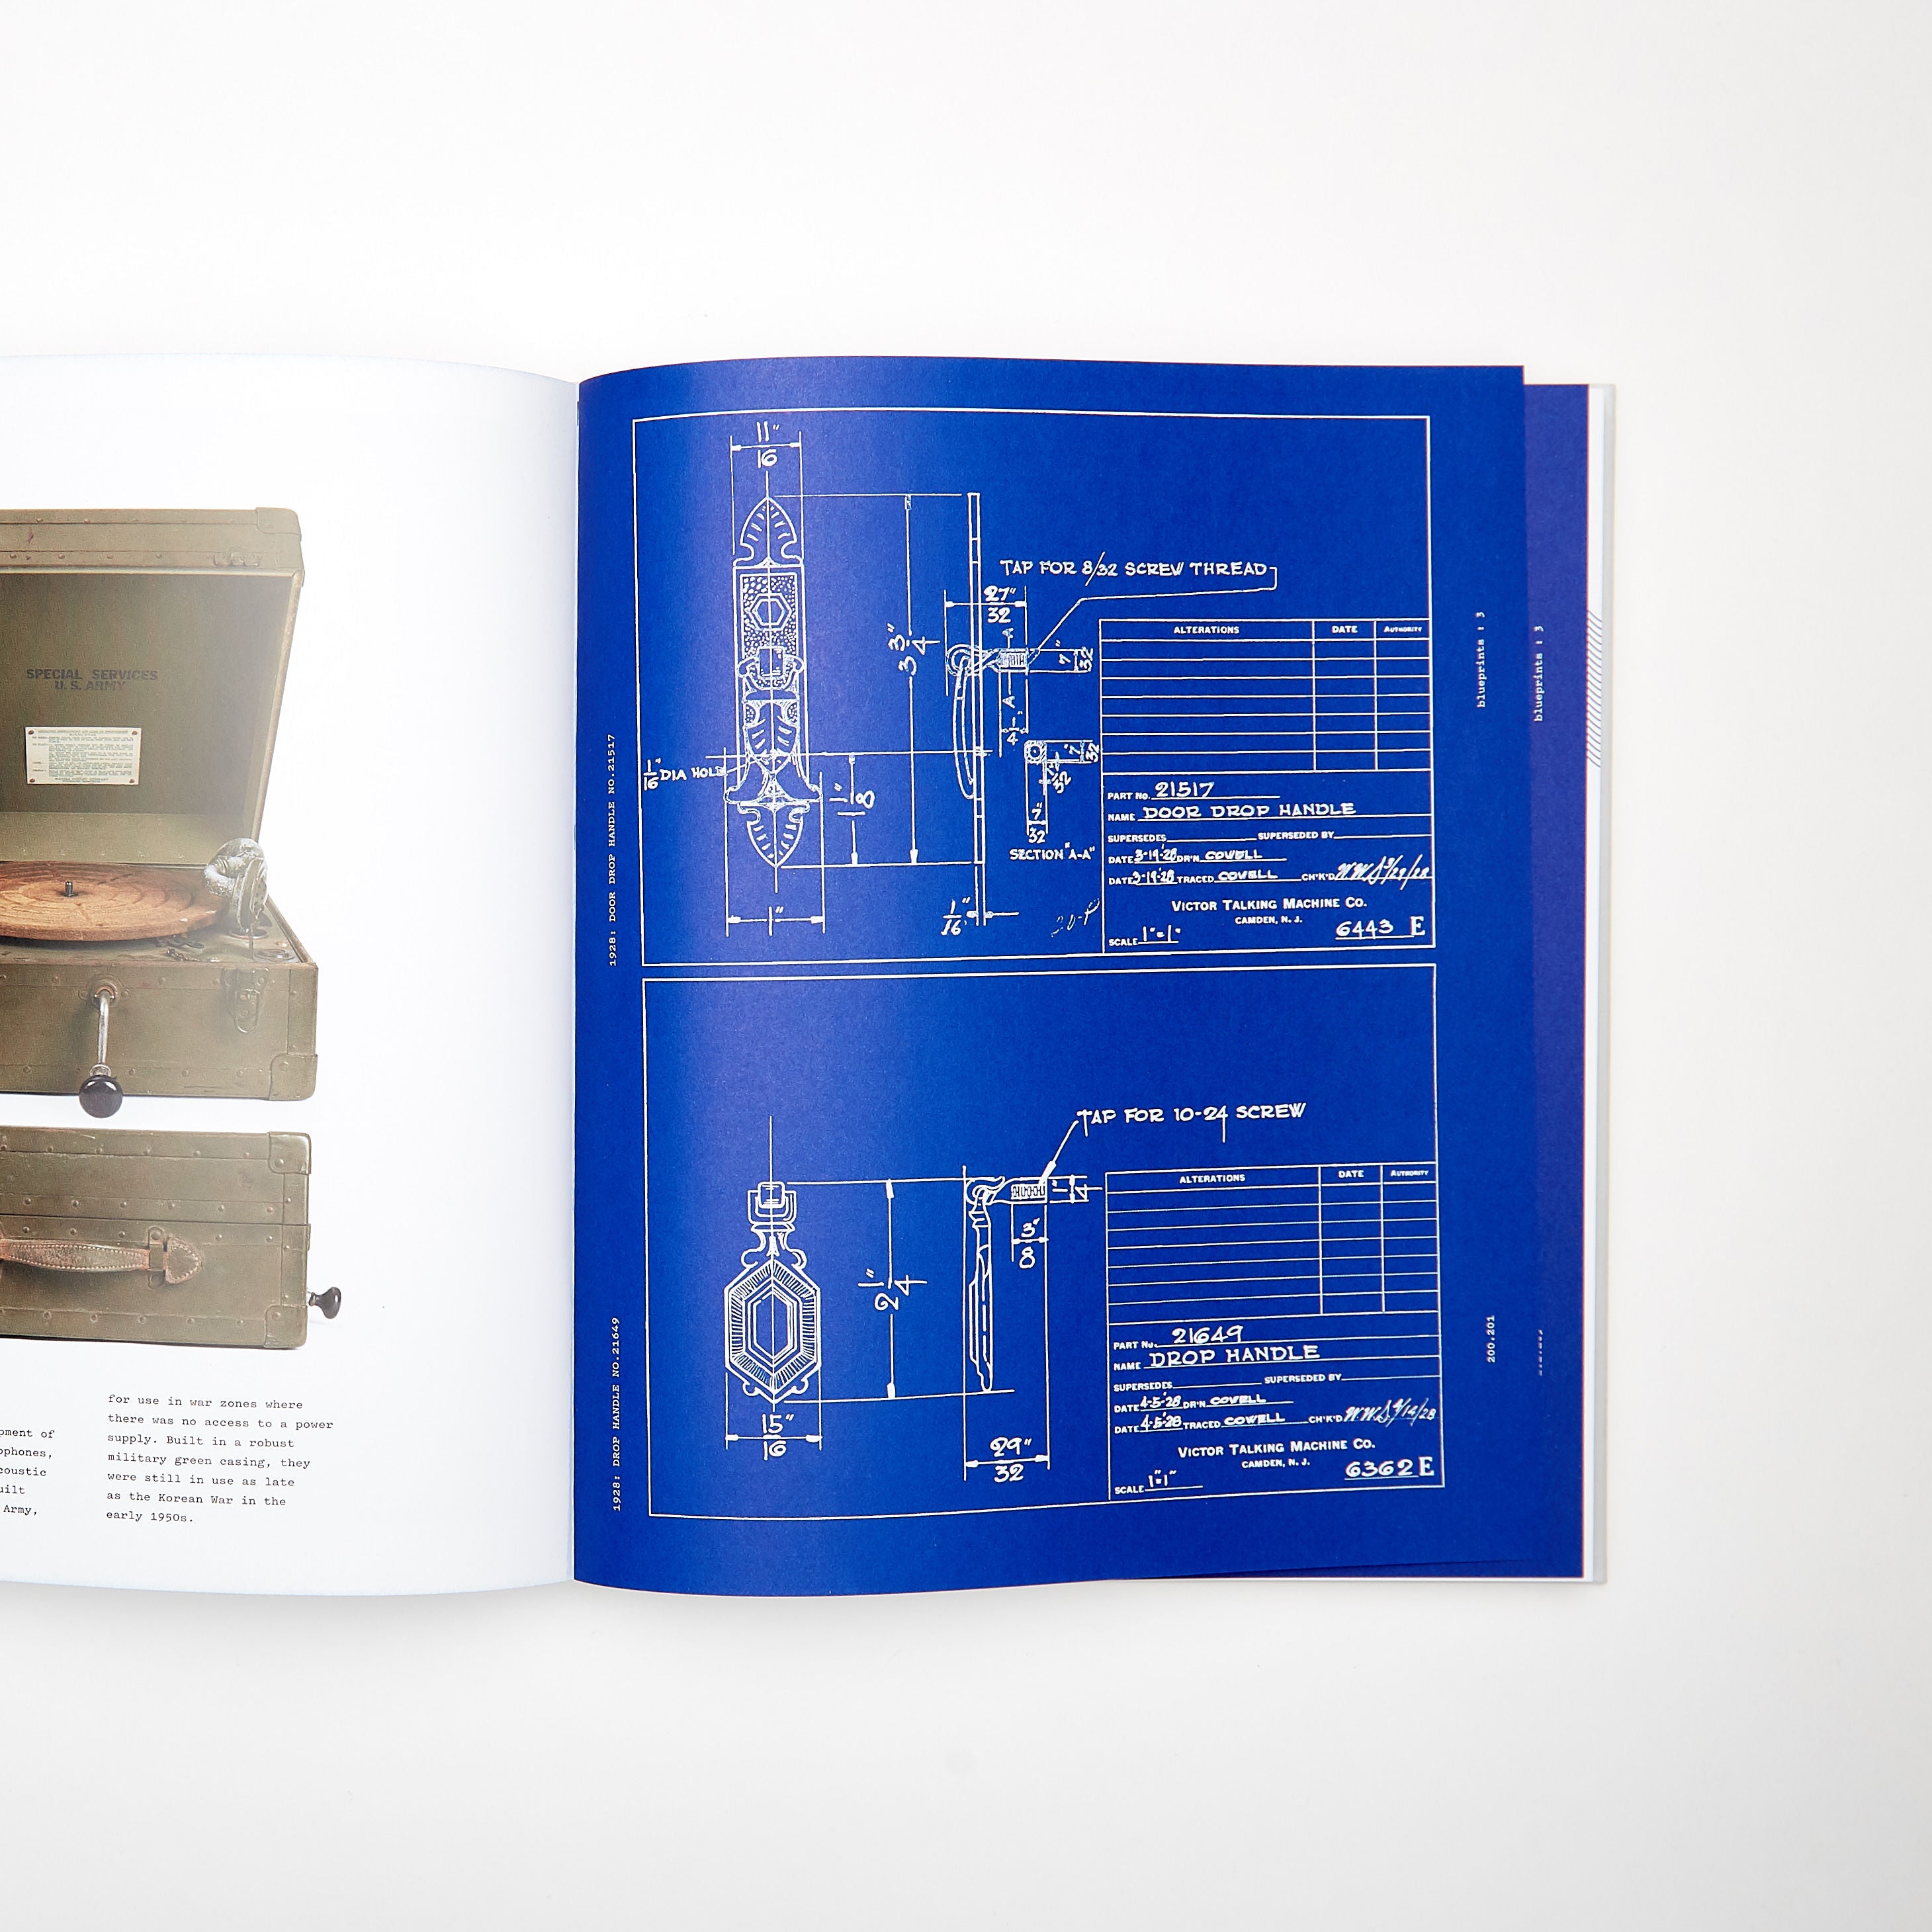 Abbey Road Studios - The Art of Sound - A Visual History for Audiophiles (by Terry Burrows): Book